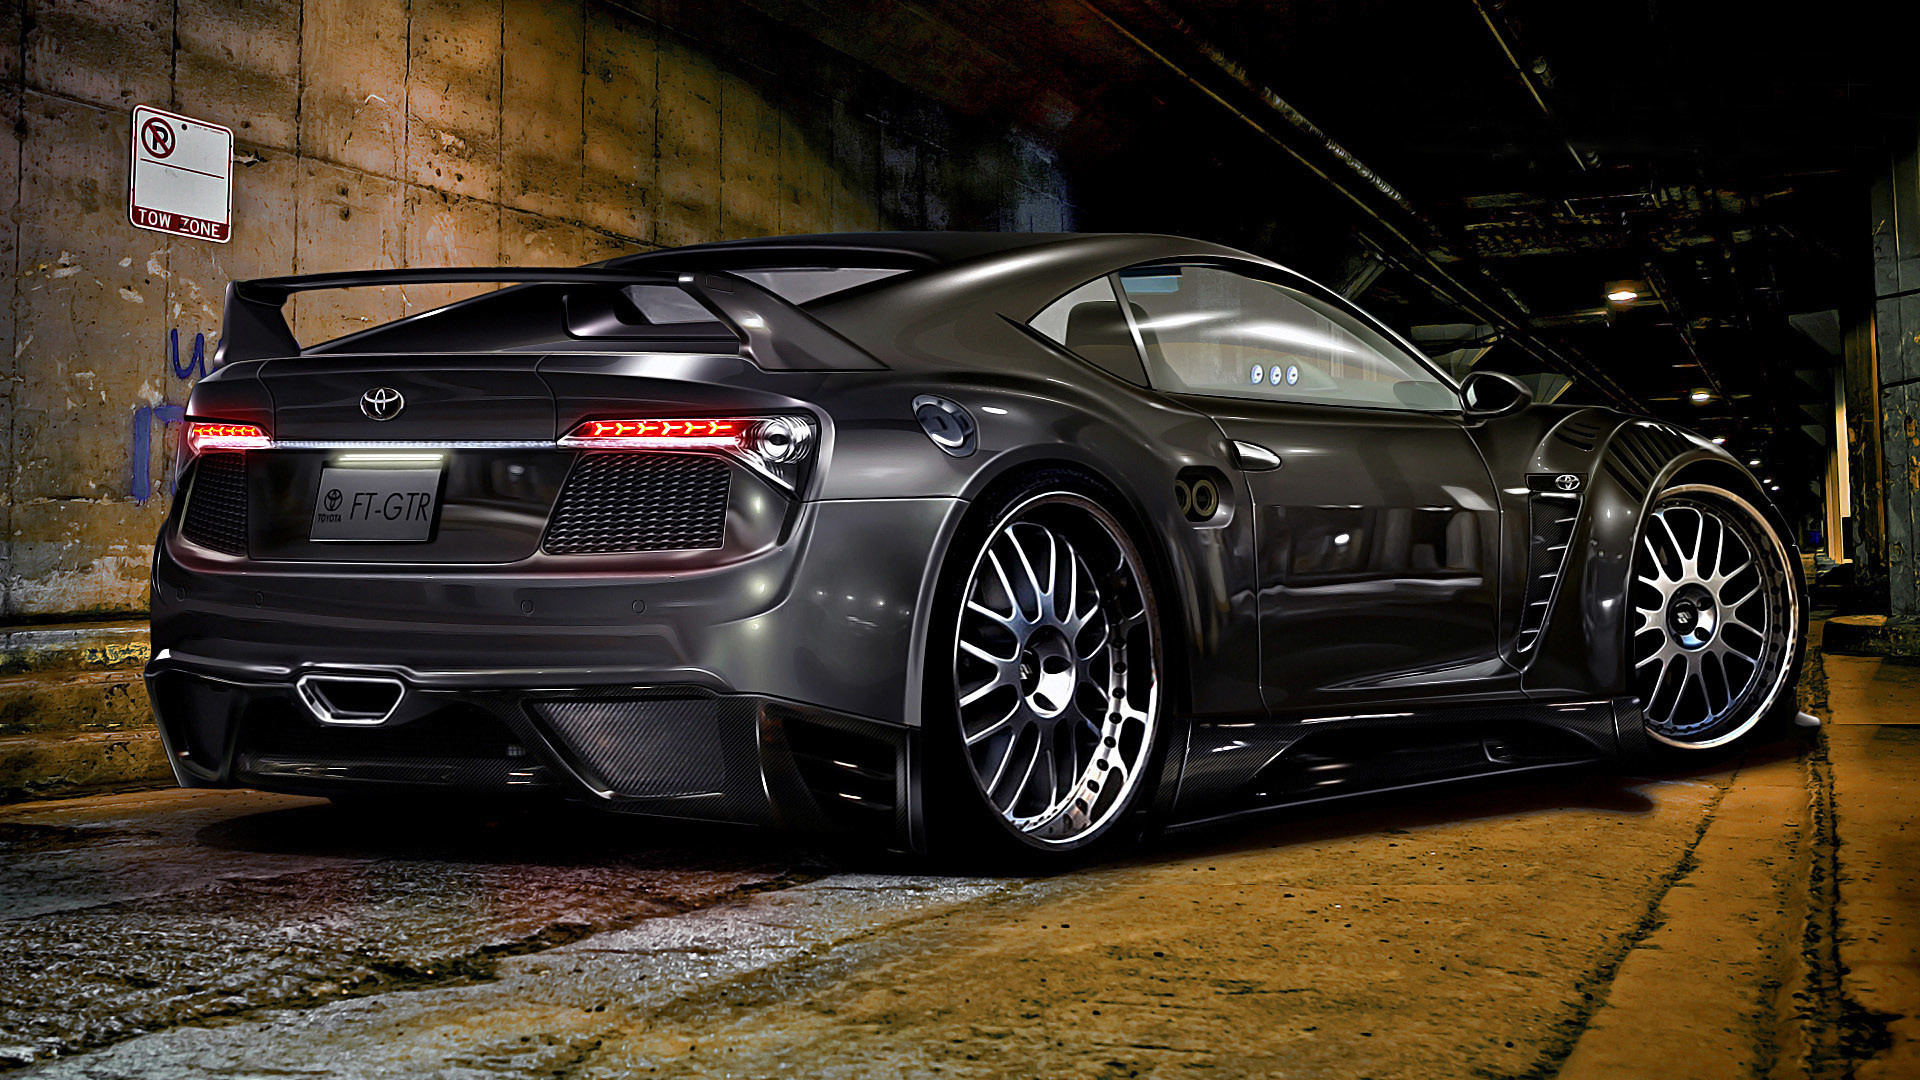 1920x1080 Cool-Car-High-Quality-suysl-For-Desktop-Backgrounds-